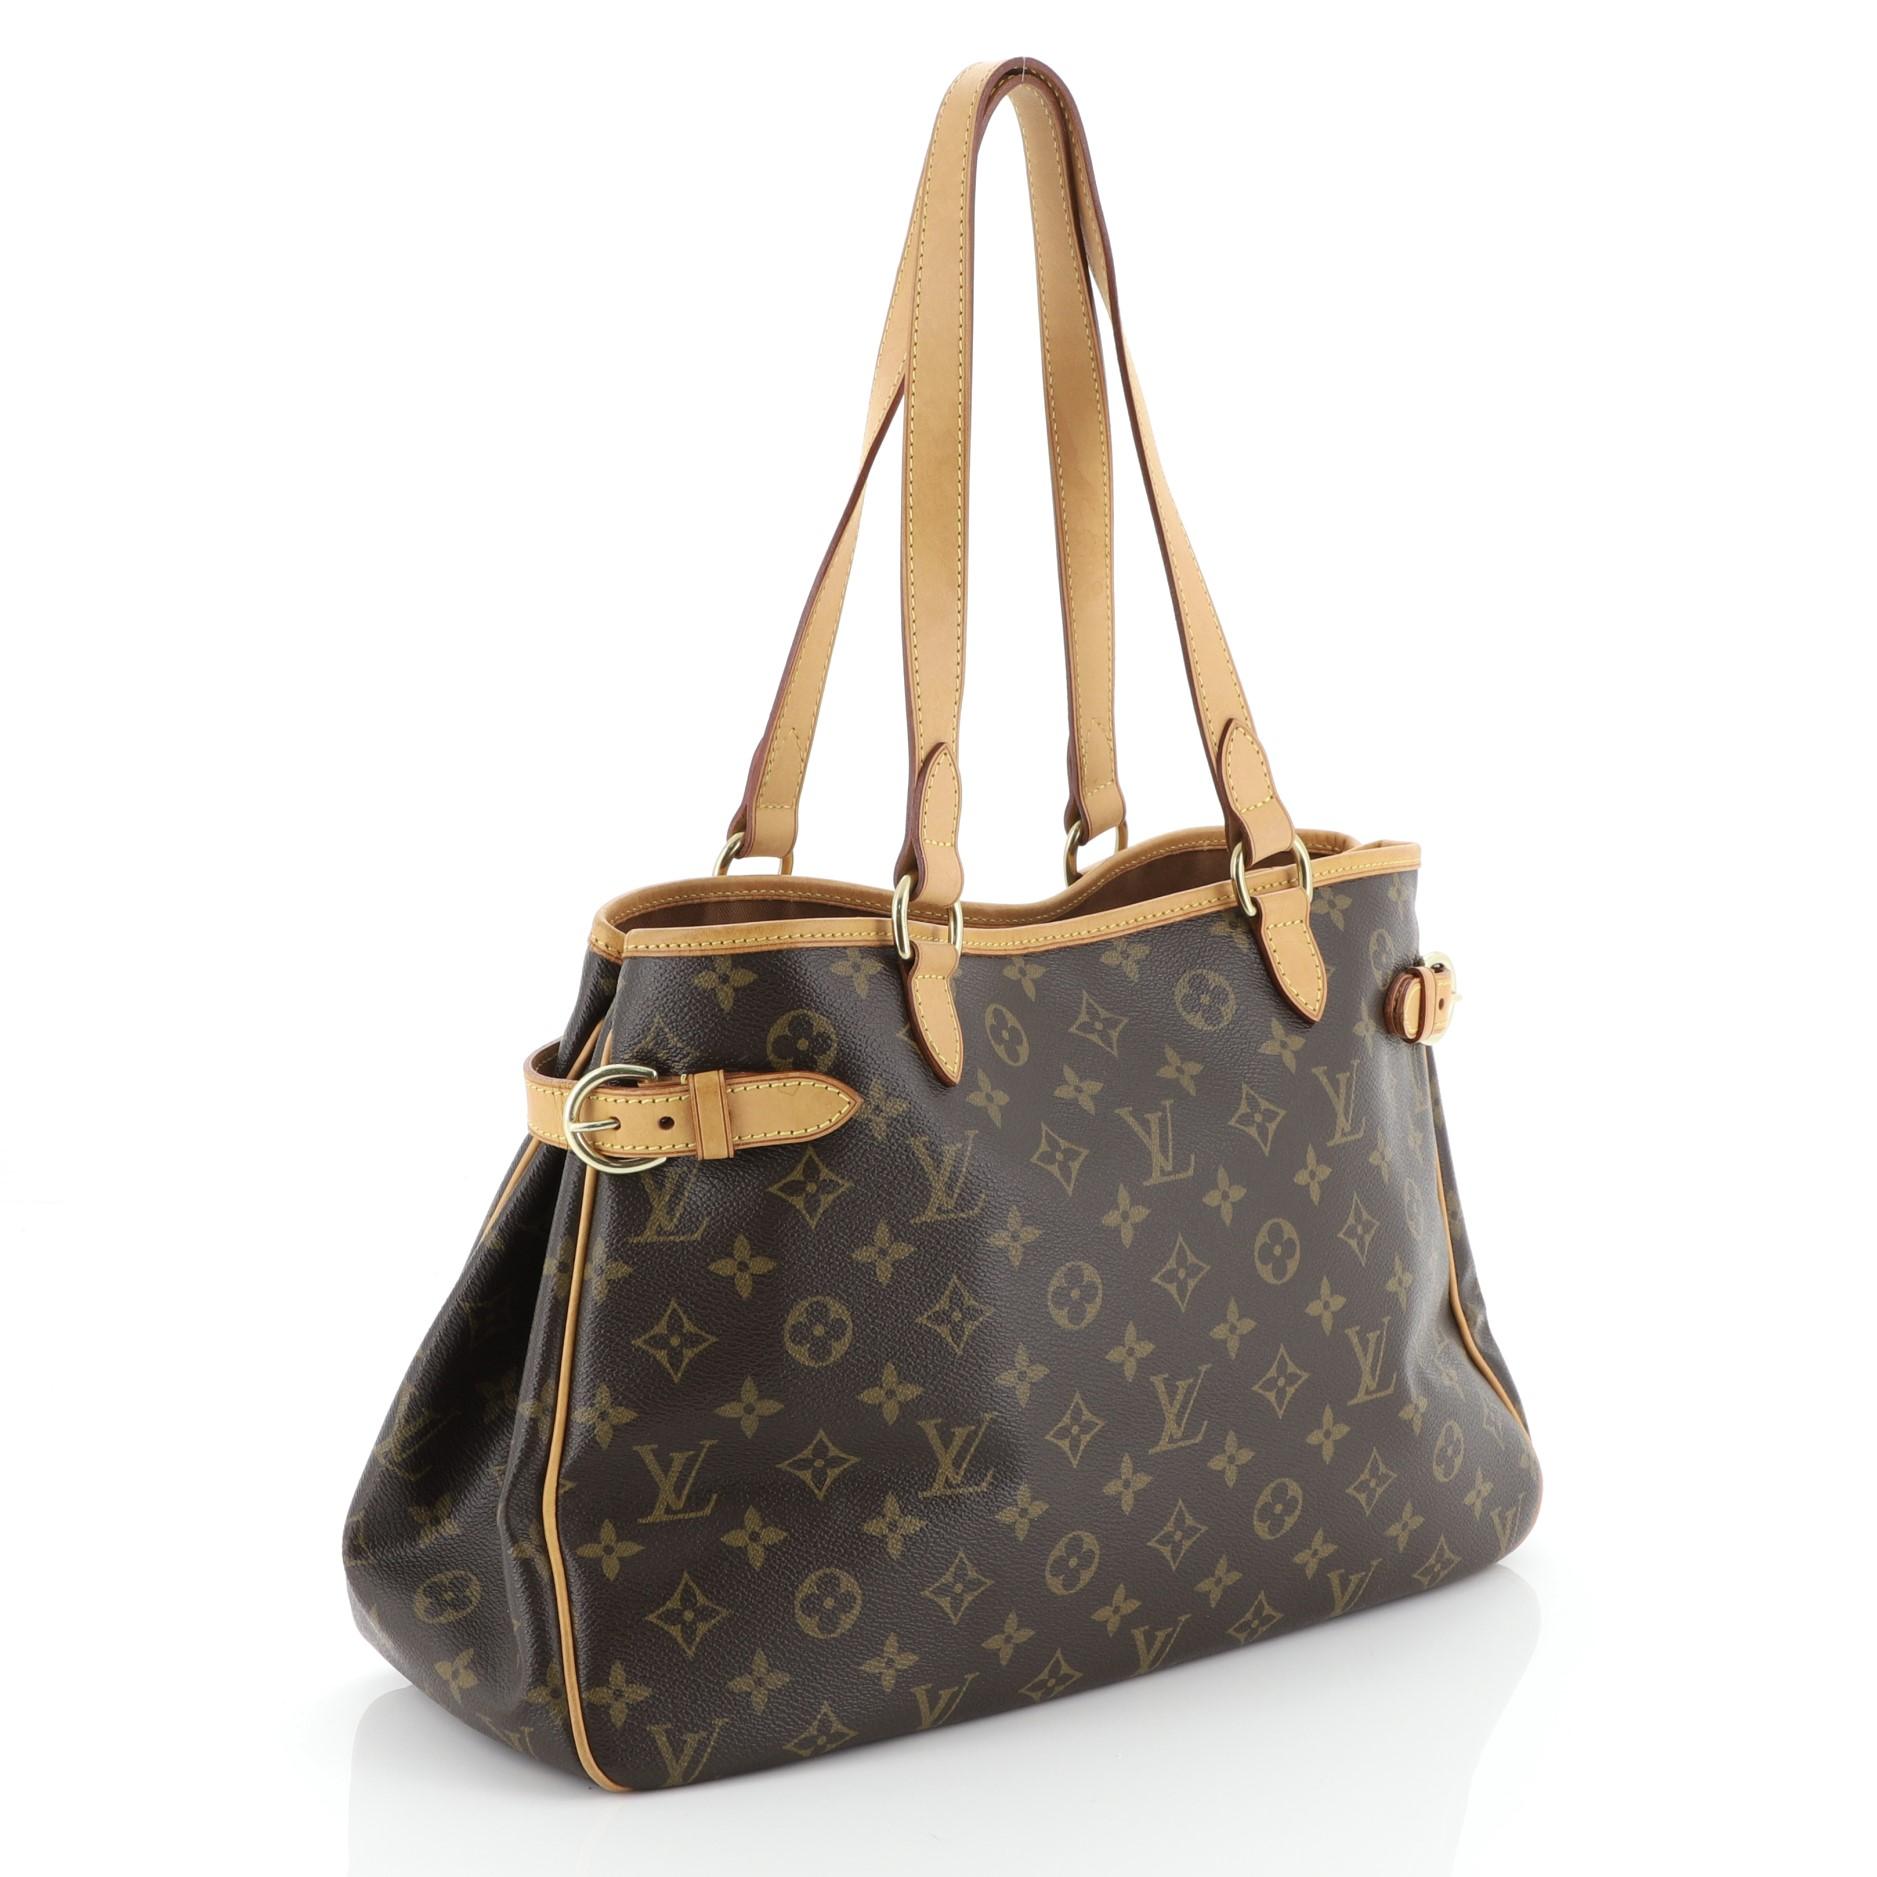 This Louis Vuitton Batignolles Handbag Monogram Canvas Horizontal, crafted in brown monogram coated canvas, features cowhide leather handles and trim, side belt strap details, and gold-tone hardware. It opens to a brown fabric interior with zip and